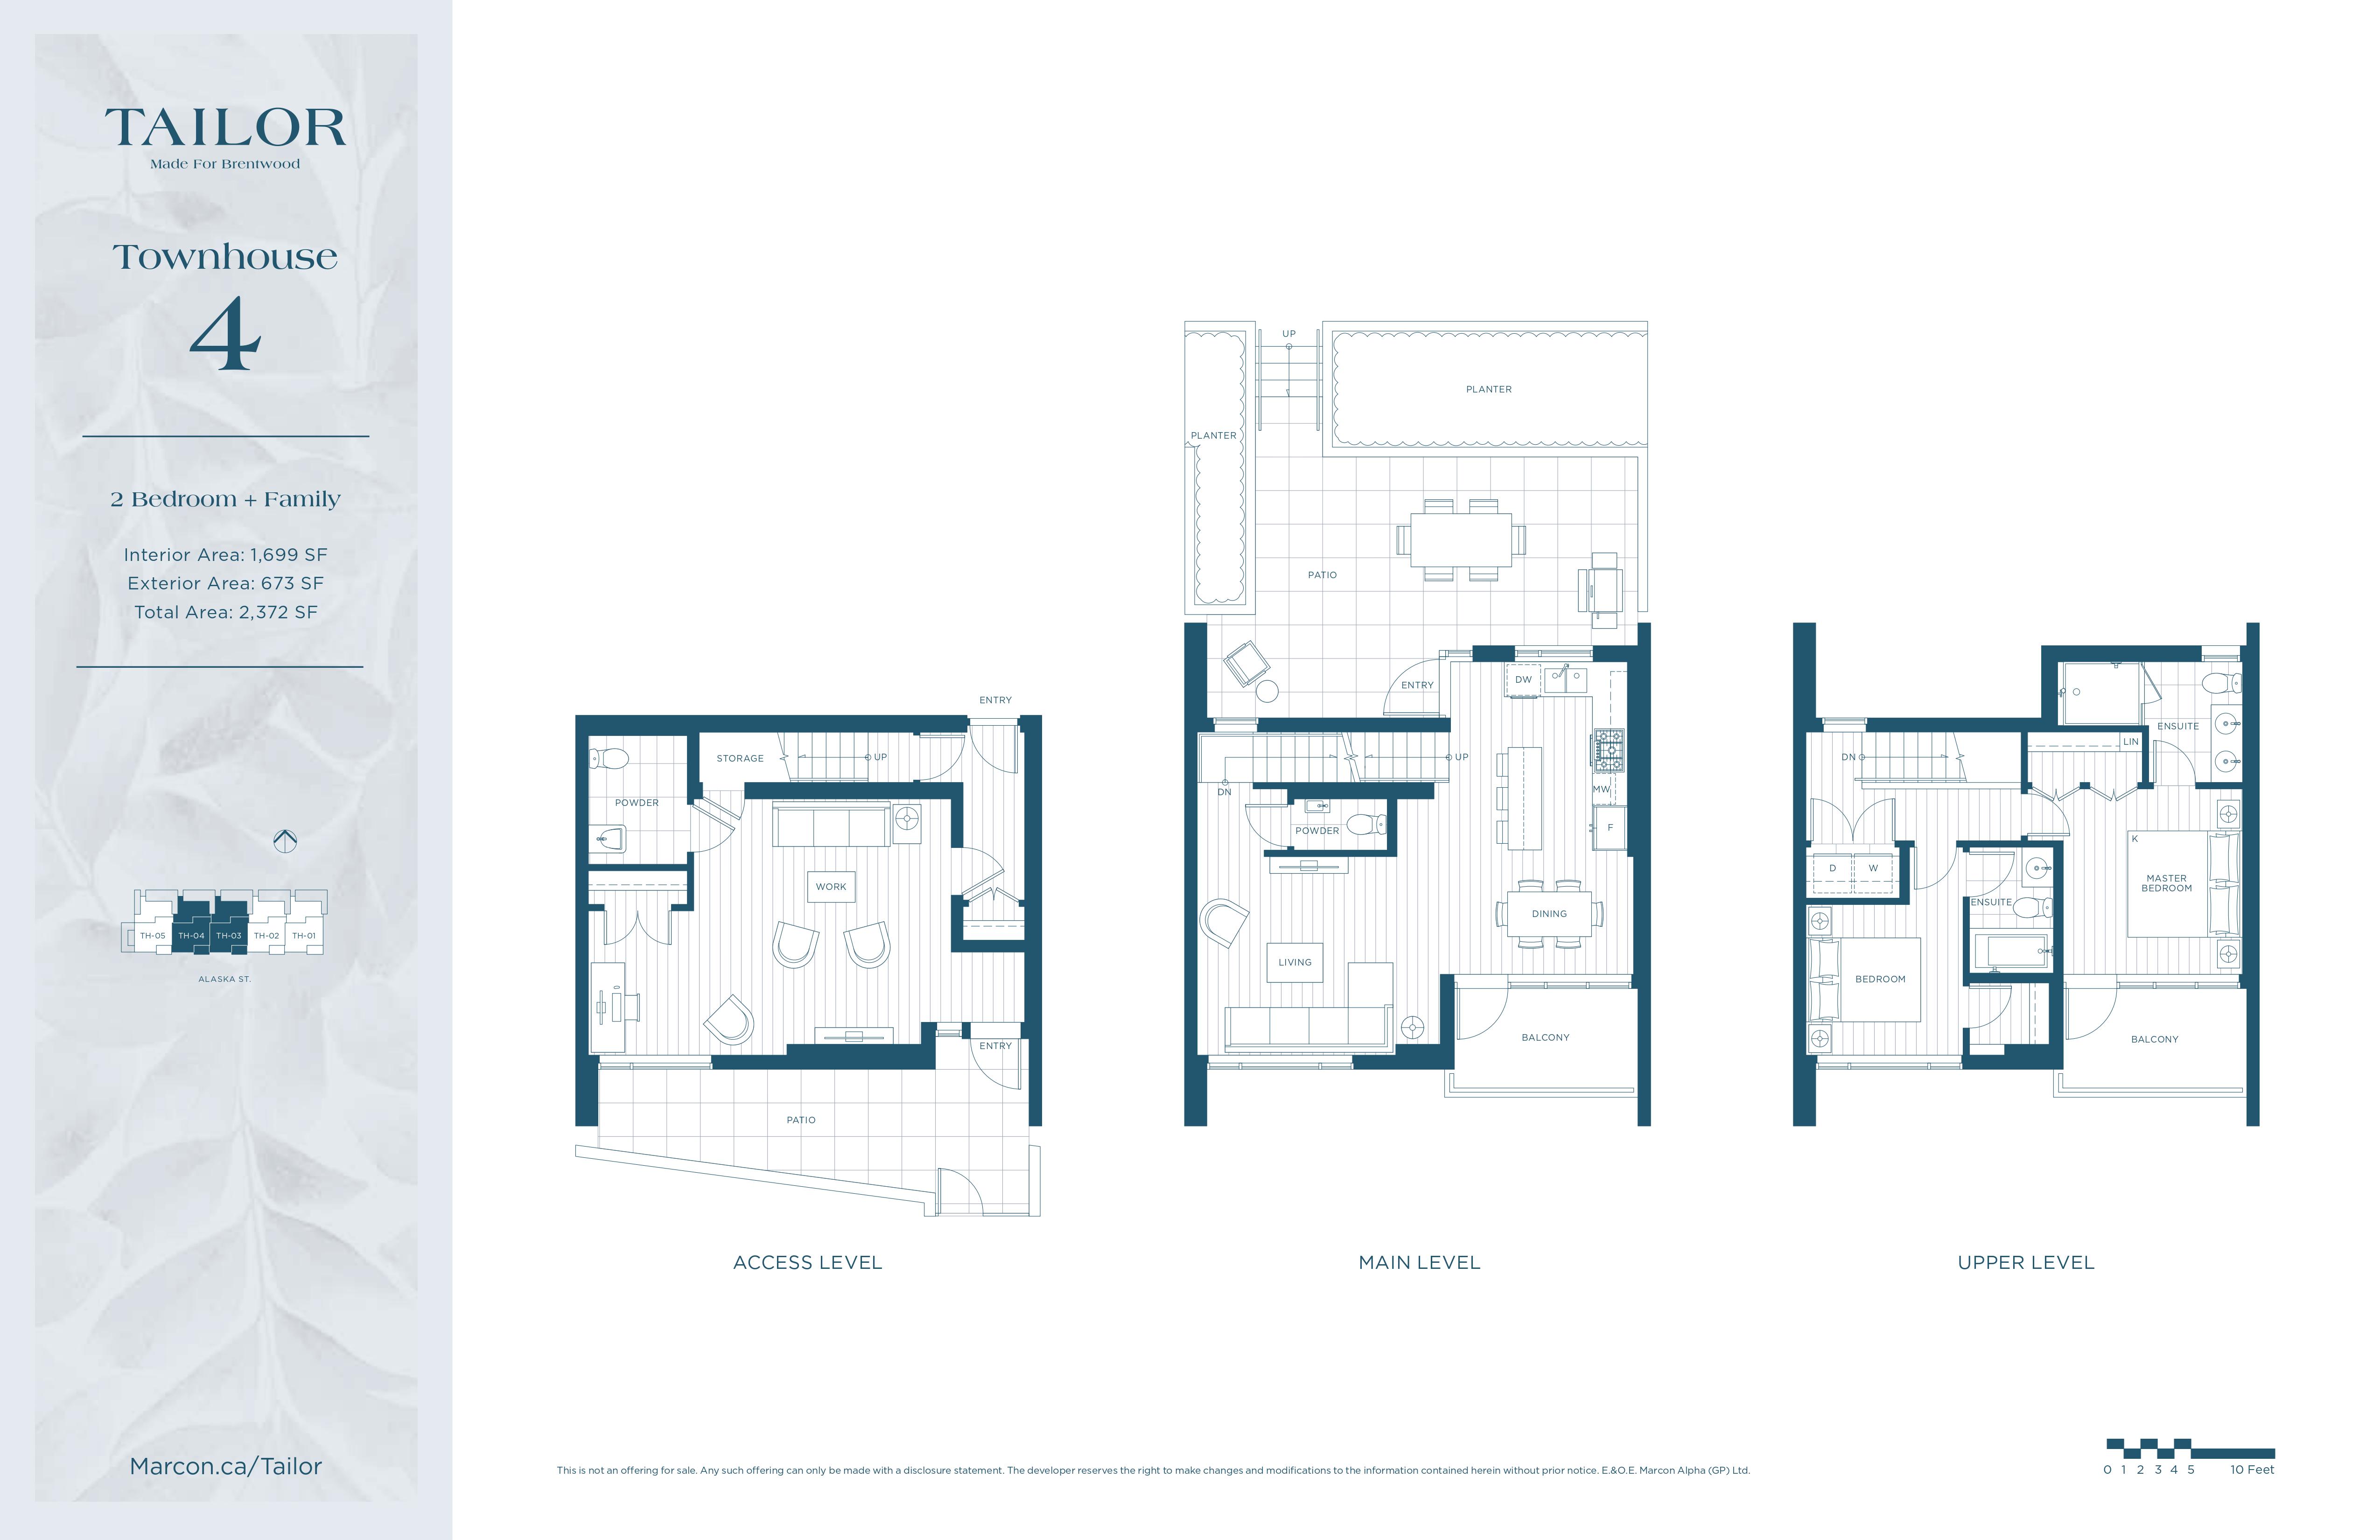  Townhouse 4  Floor Plan of Tailor Condos with undefined beds